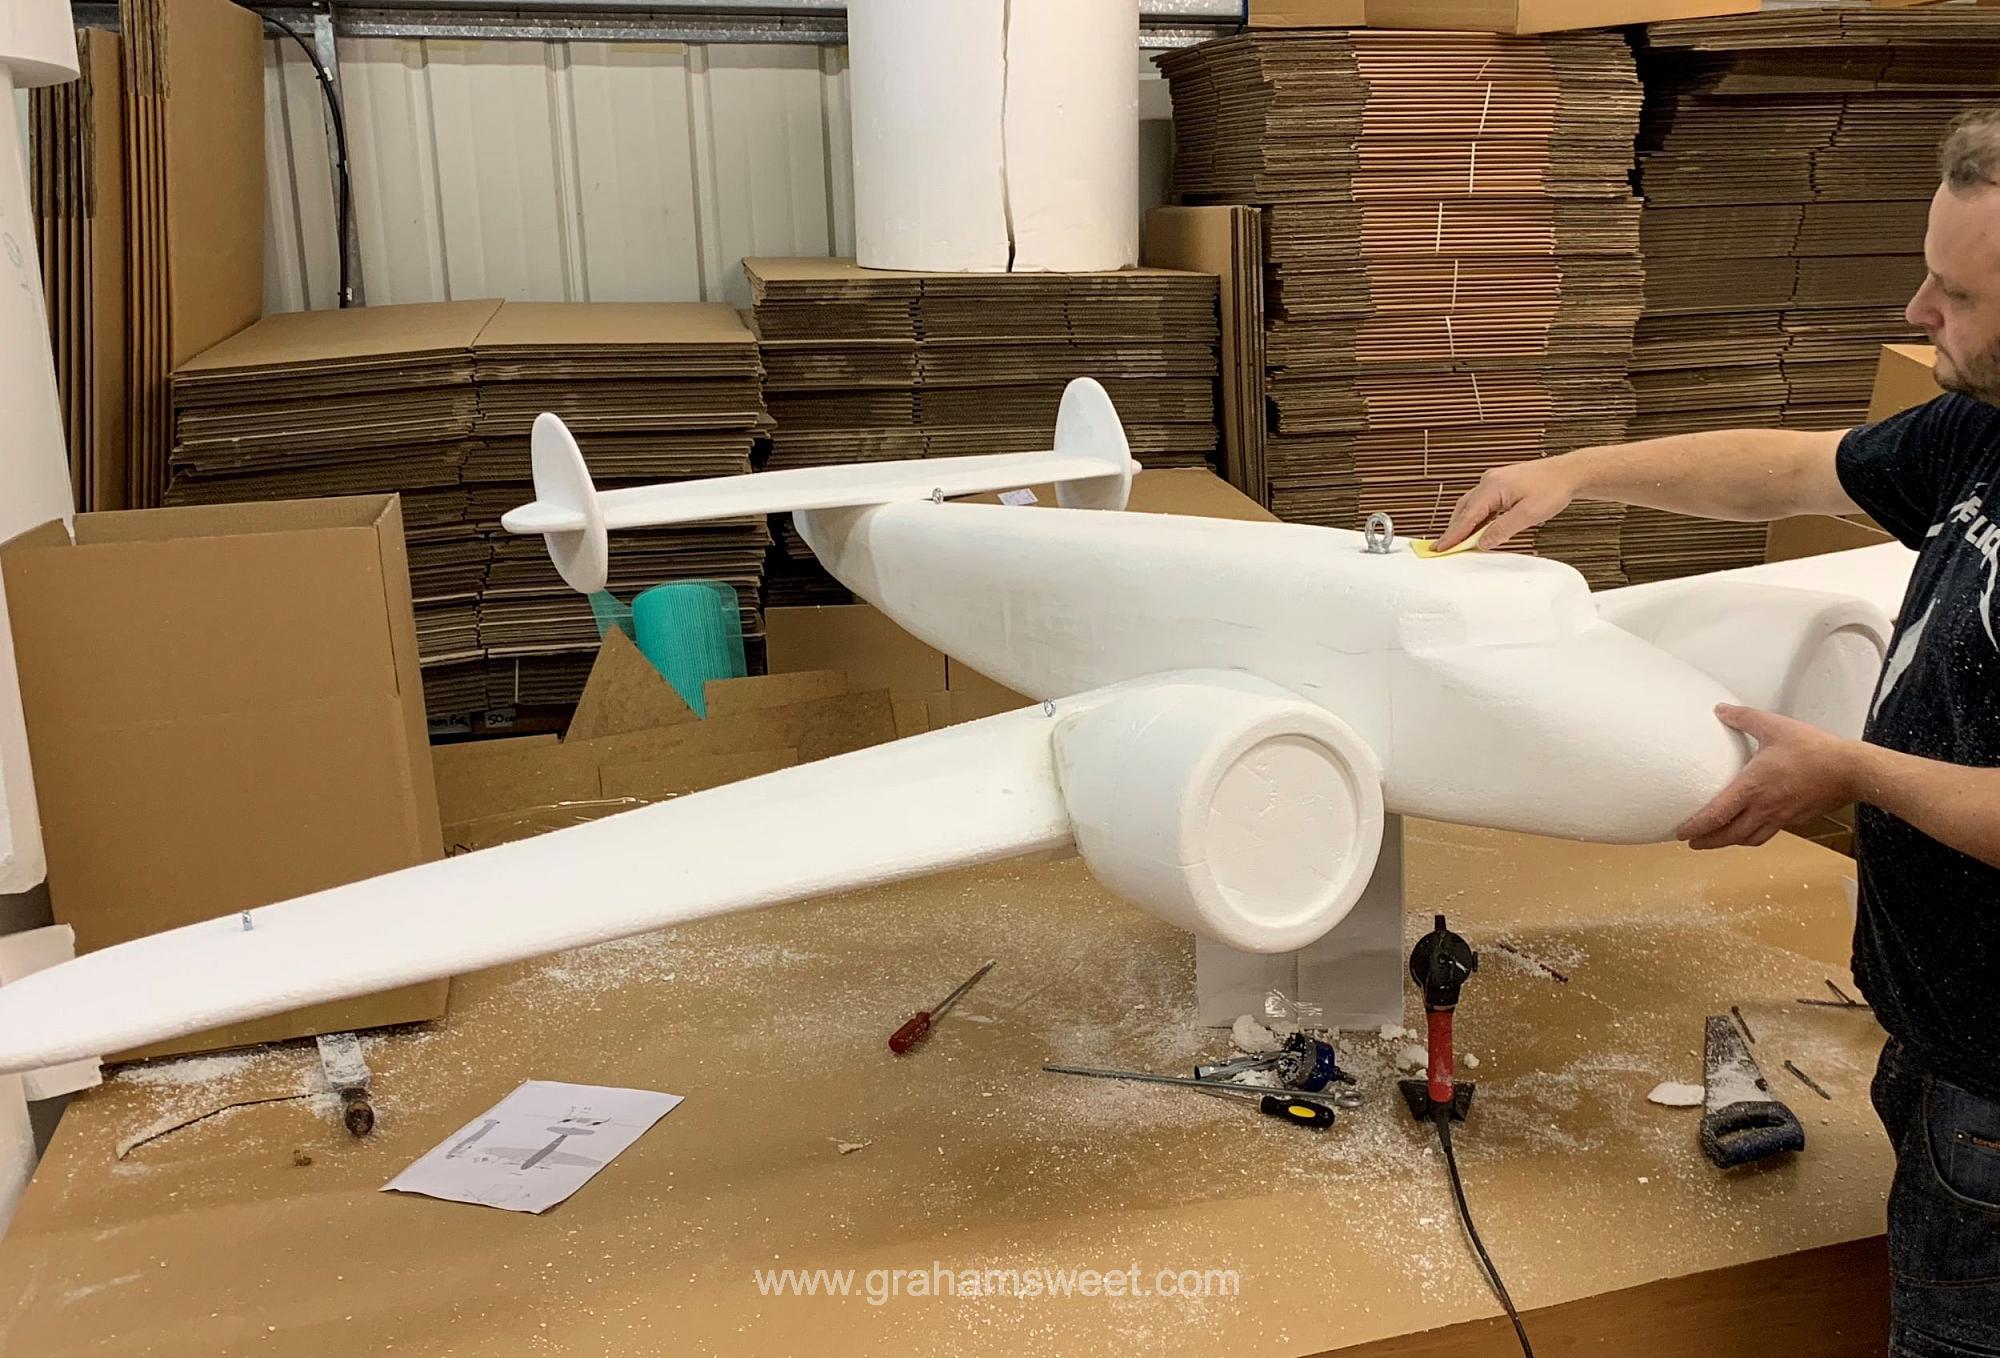 scale polystyrene model of a plane